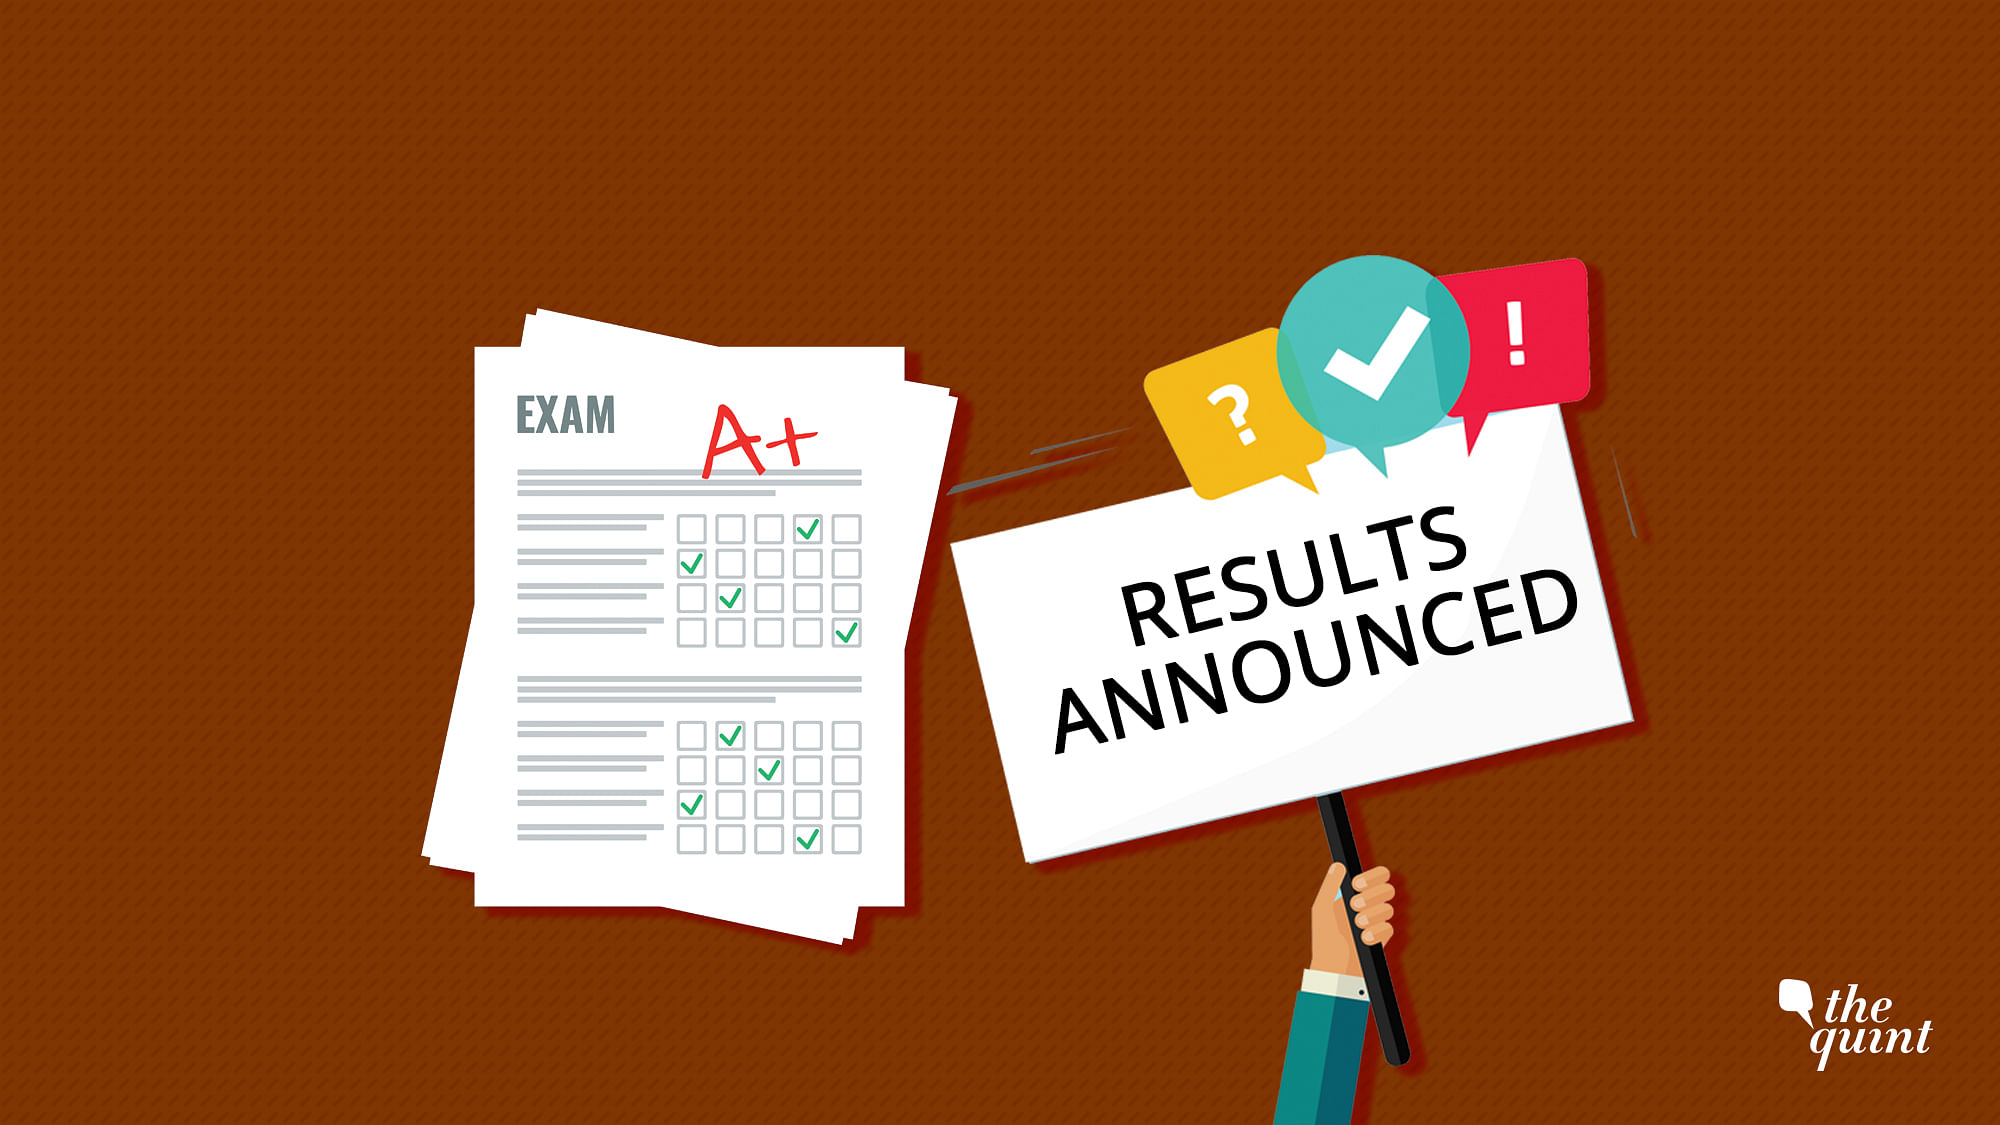 Indian Institute of Technology (IIT) Roorkee declared IIT JEE Advance 2019 examination result today.